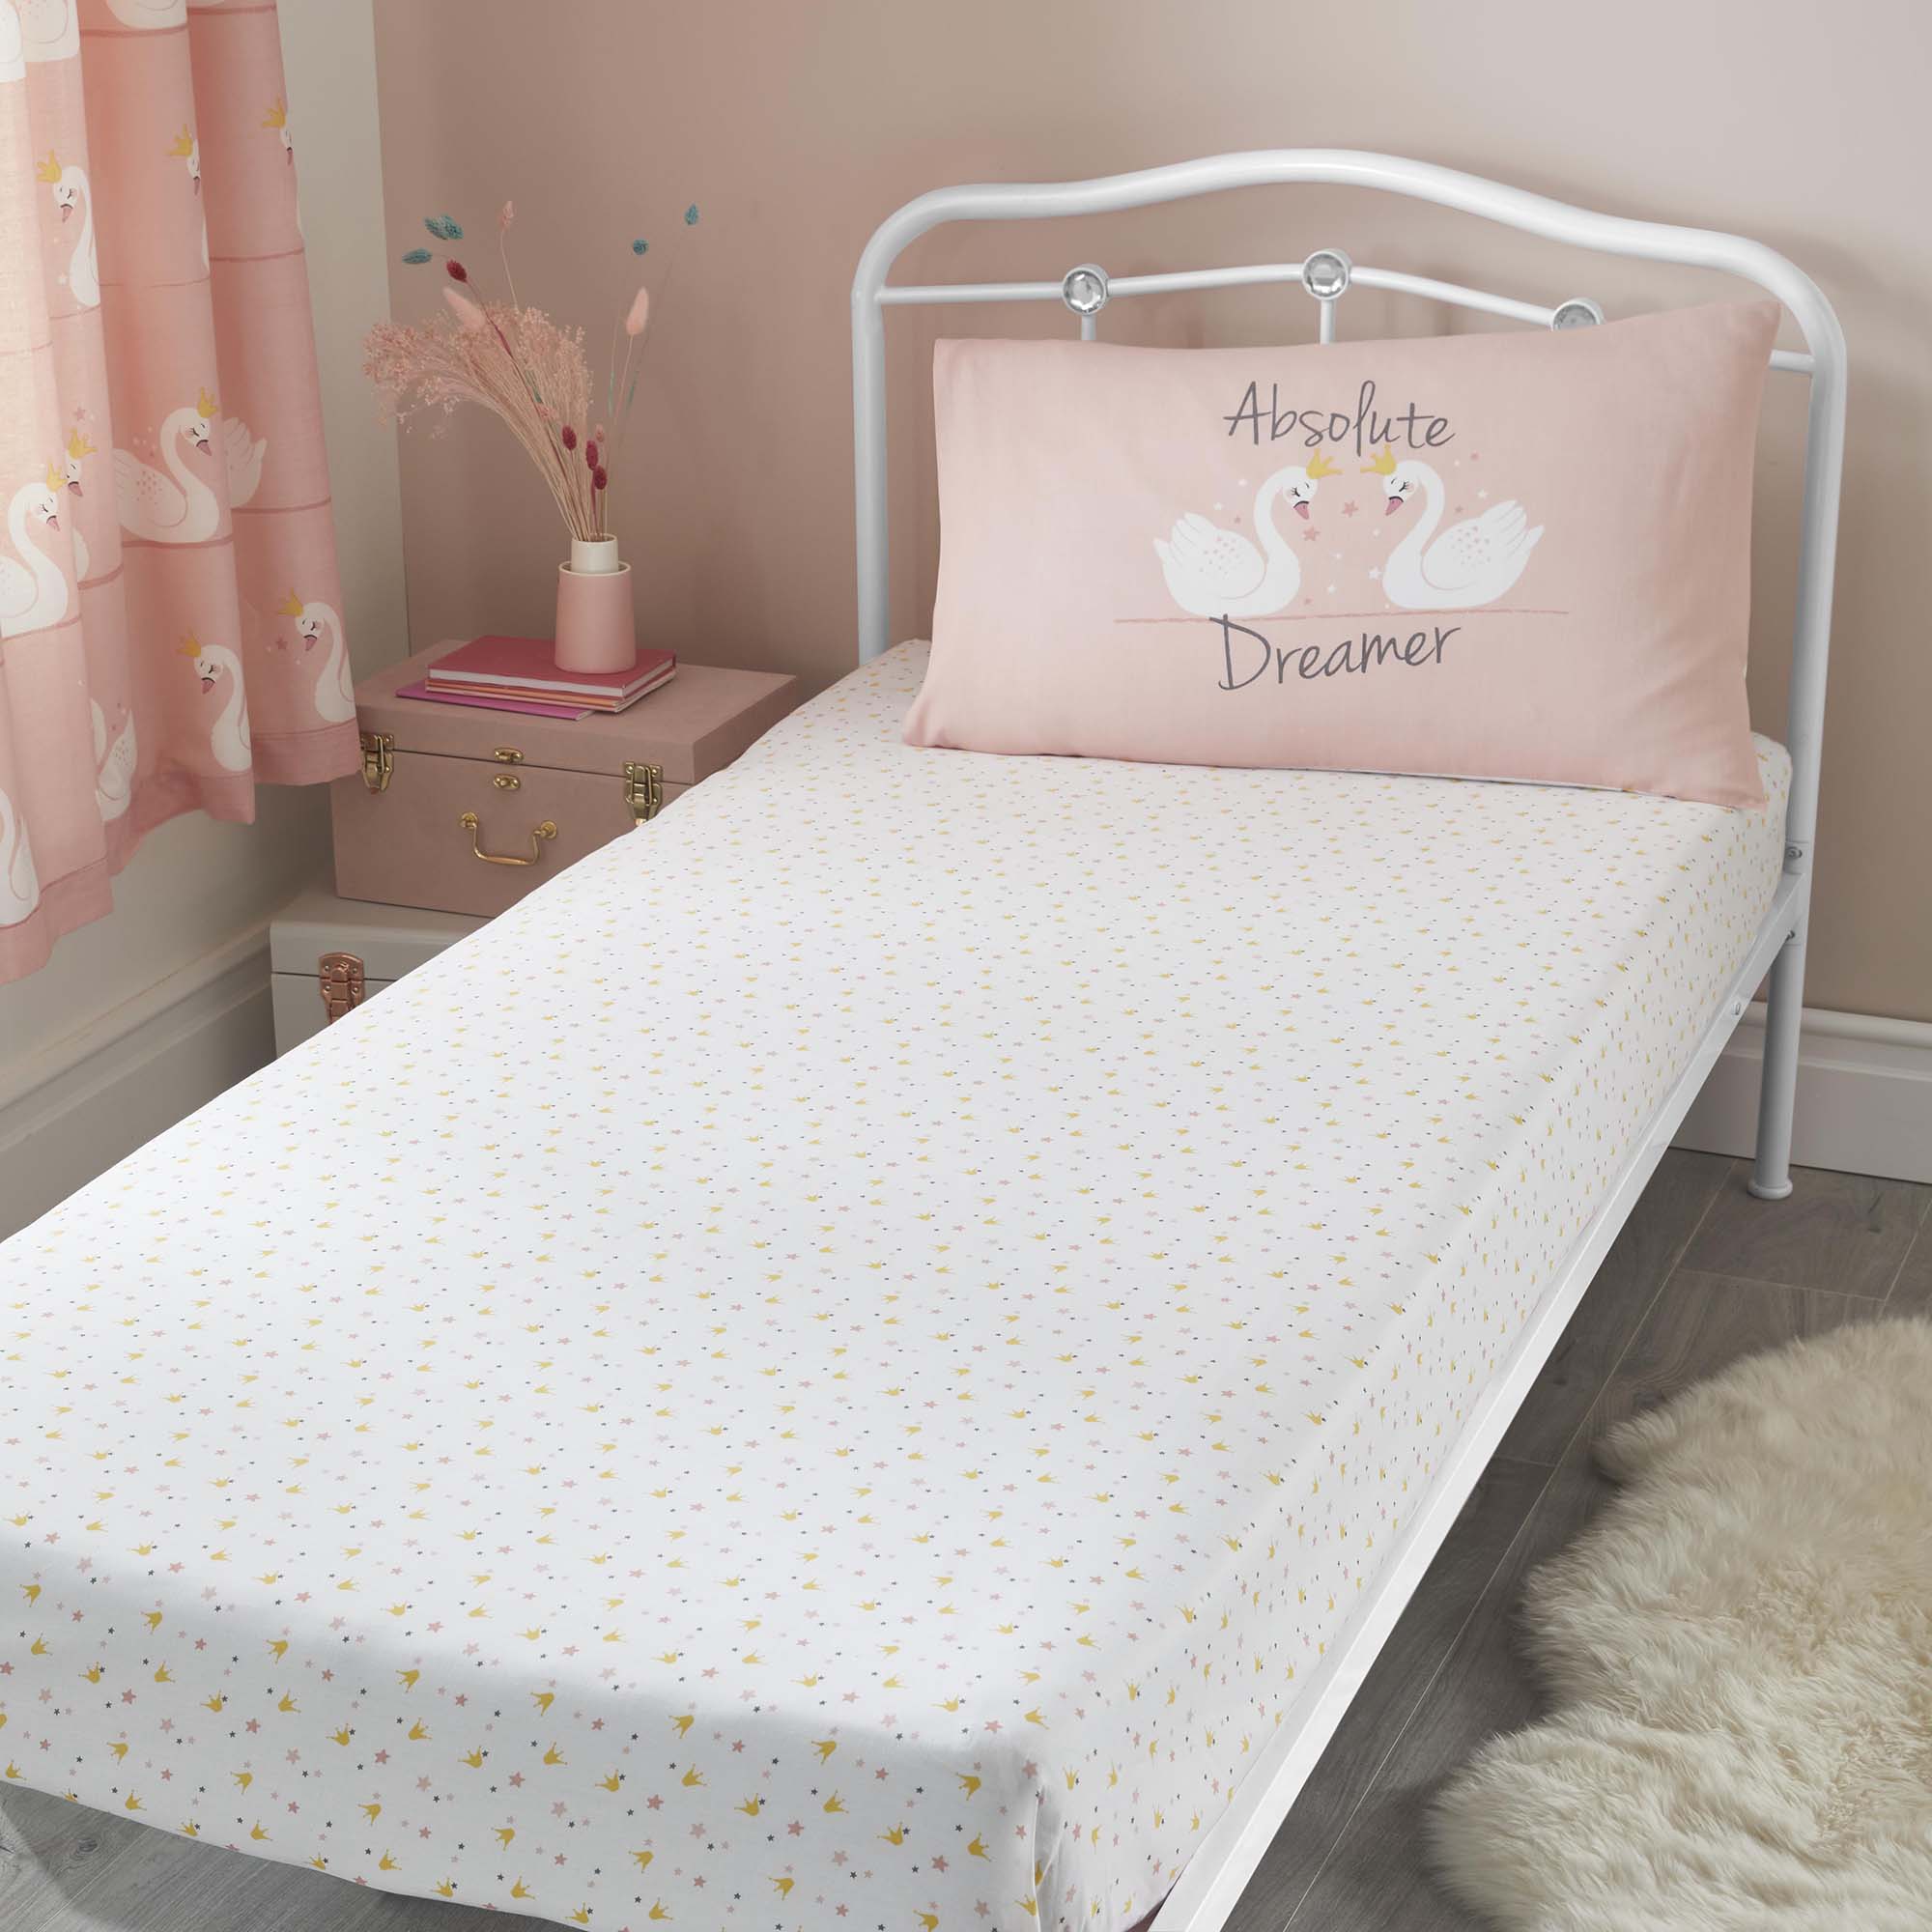 Swan - Kids Duvet Cover Set, Curtains & Fitted Sheets in Coral - by Bedlam